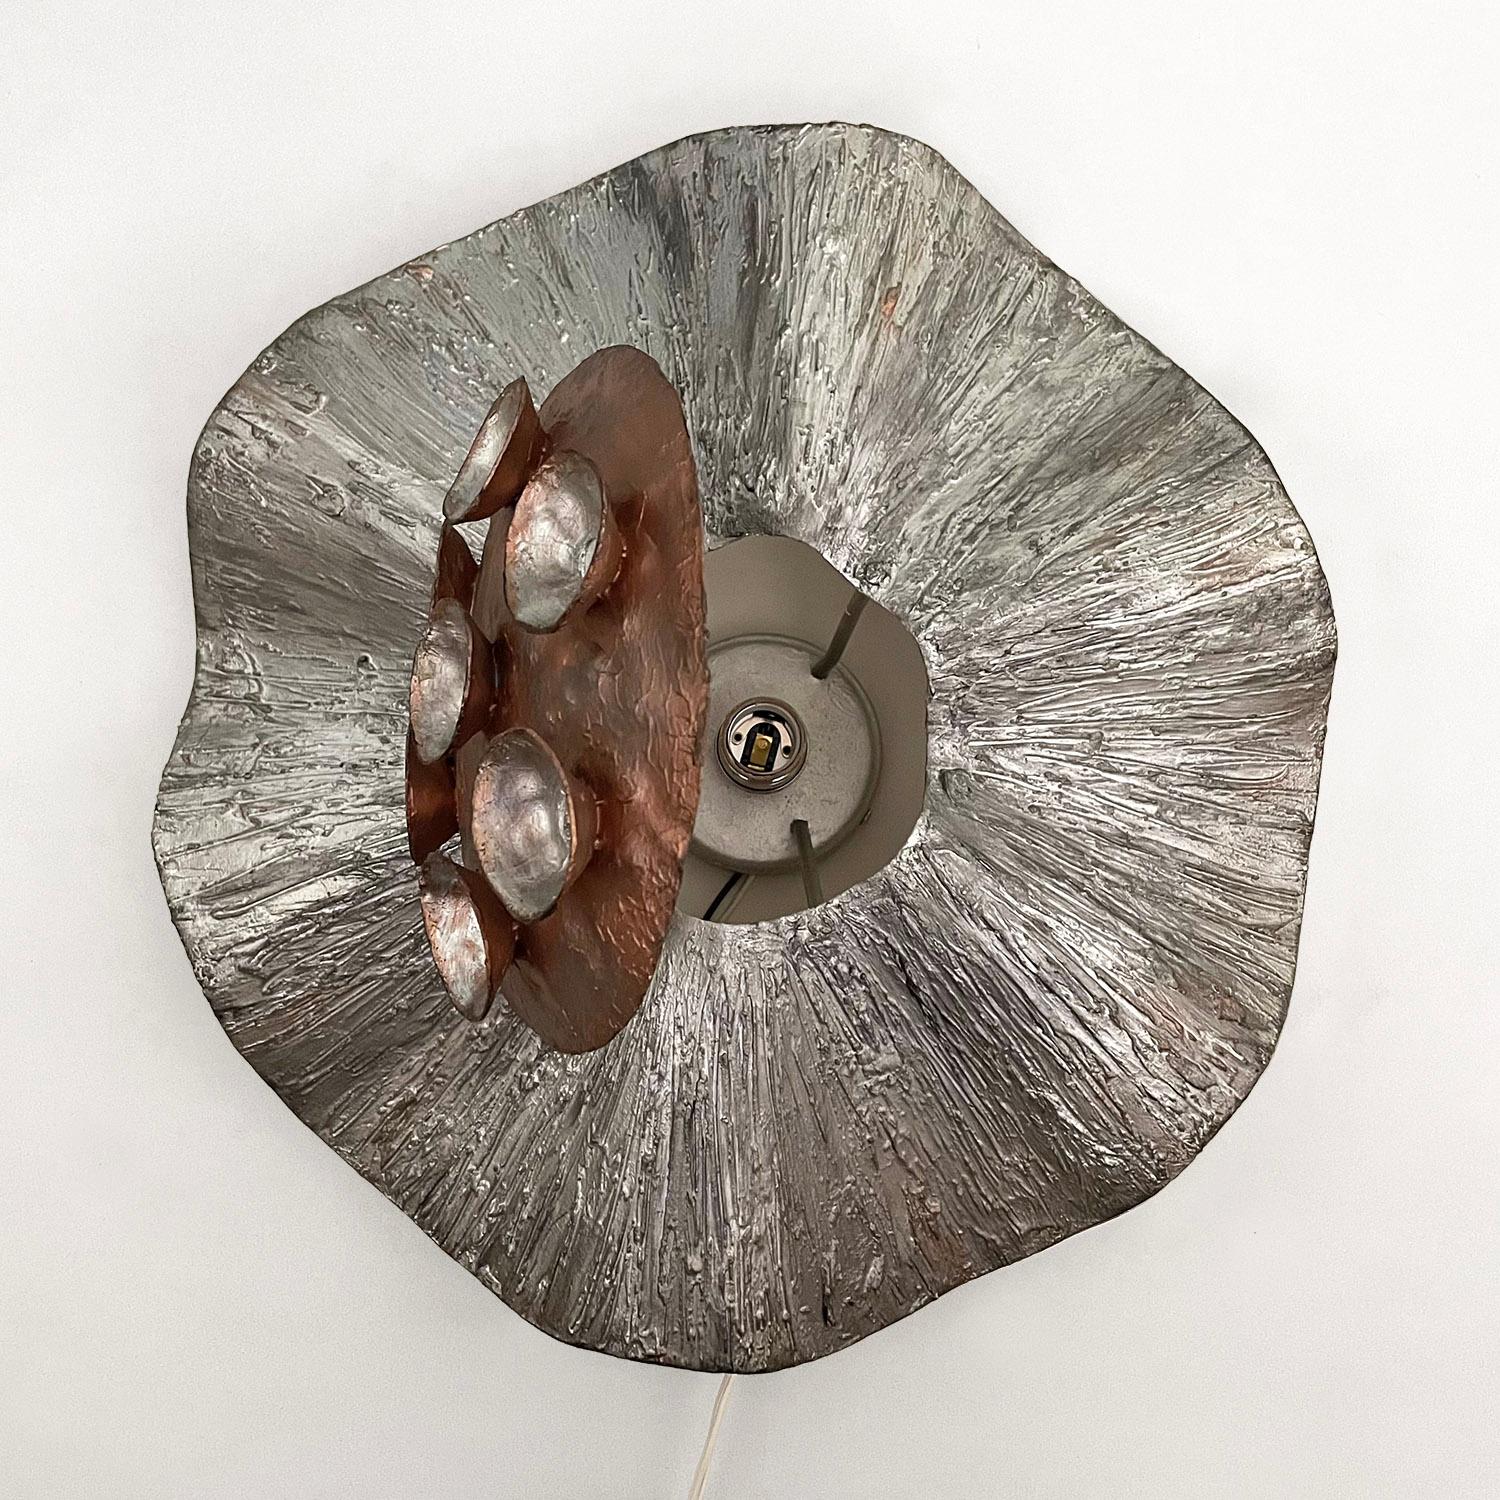 Brutalist wall sconce.
France, circa 1970s.
Organic shape and form.
Wonderful color, texture and patina throughout. 
Newly rewired.